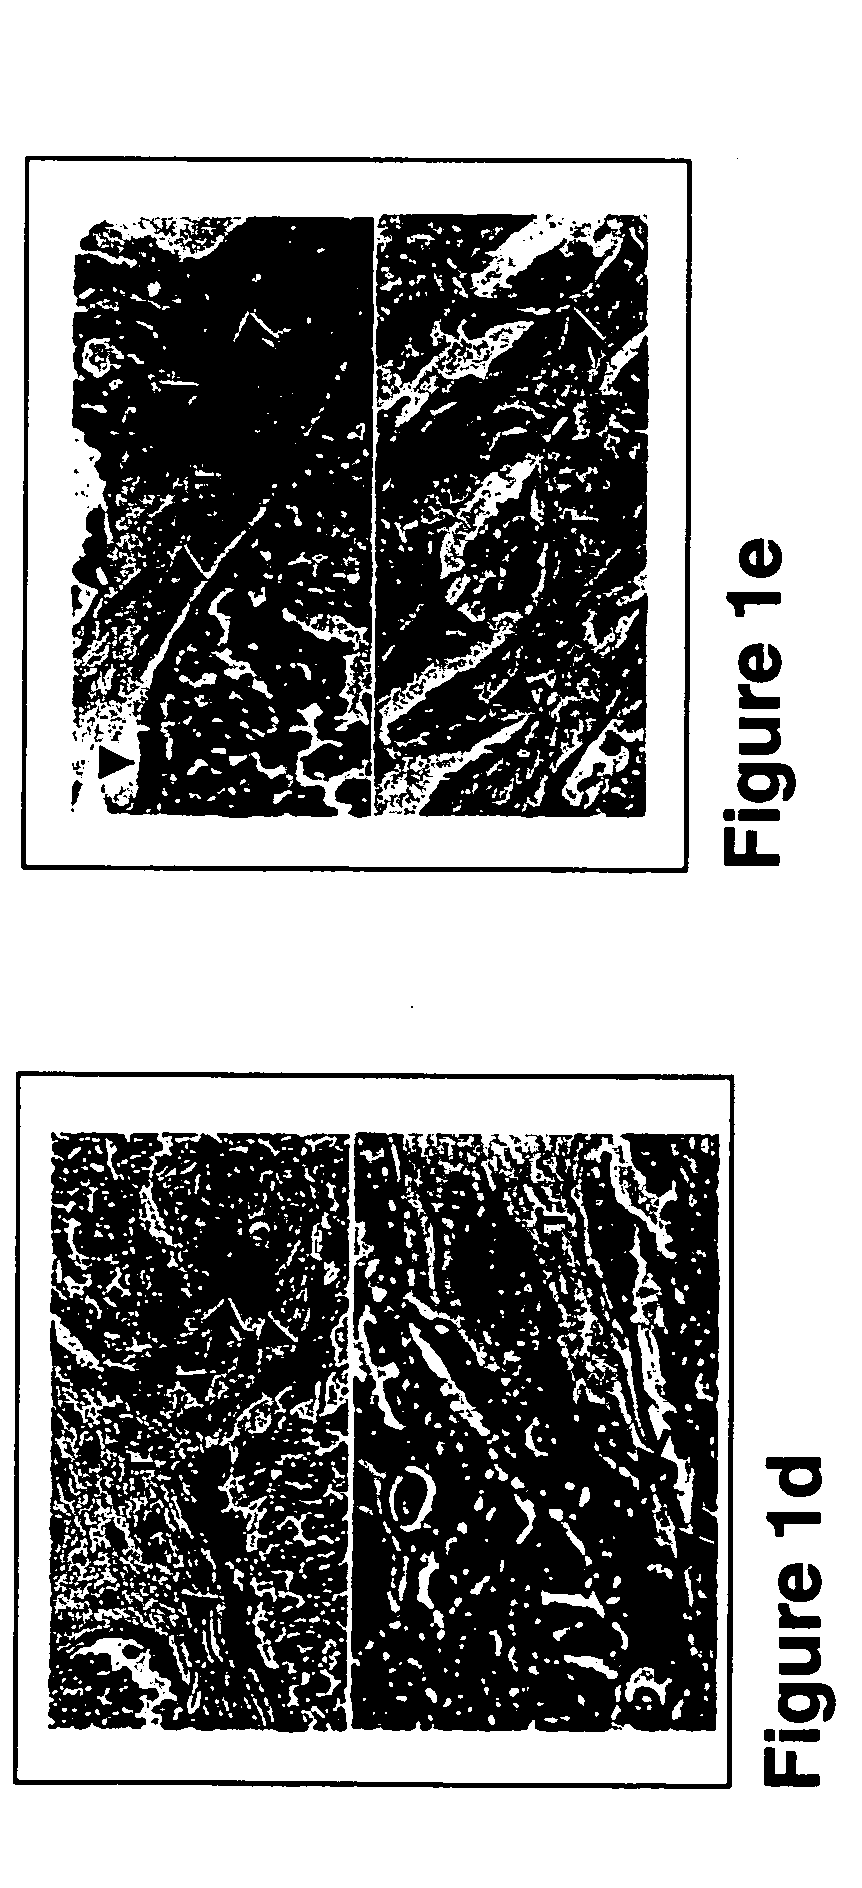 Methods, kits and pharmaceutical compositions for diagnosing, delaying onset of, preventing and/or treating osteoporosis